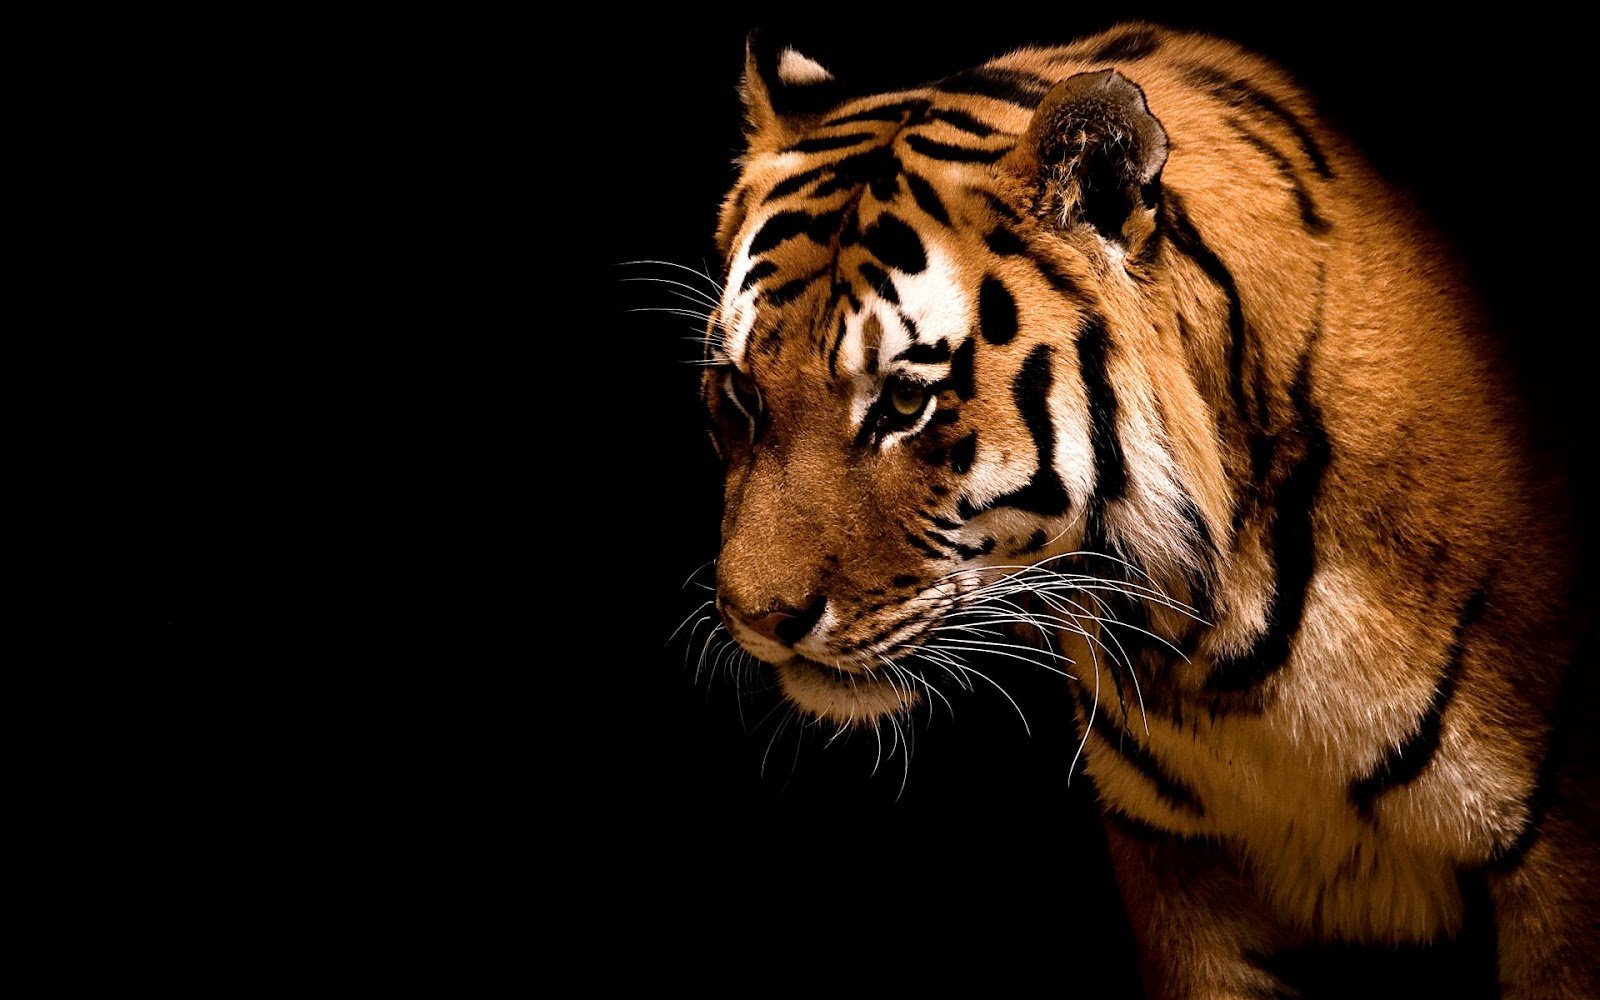 Amazing Wallpapers Of Tigers Unique Wallpaper